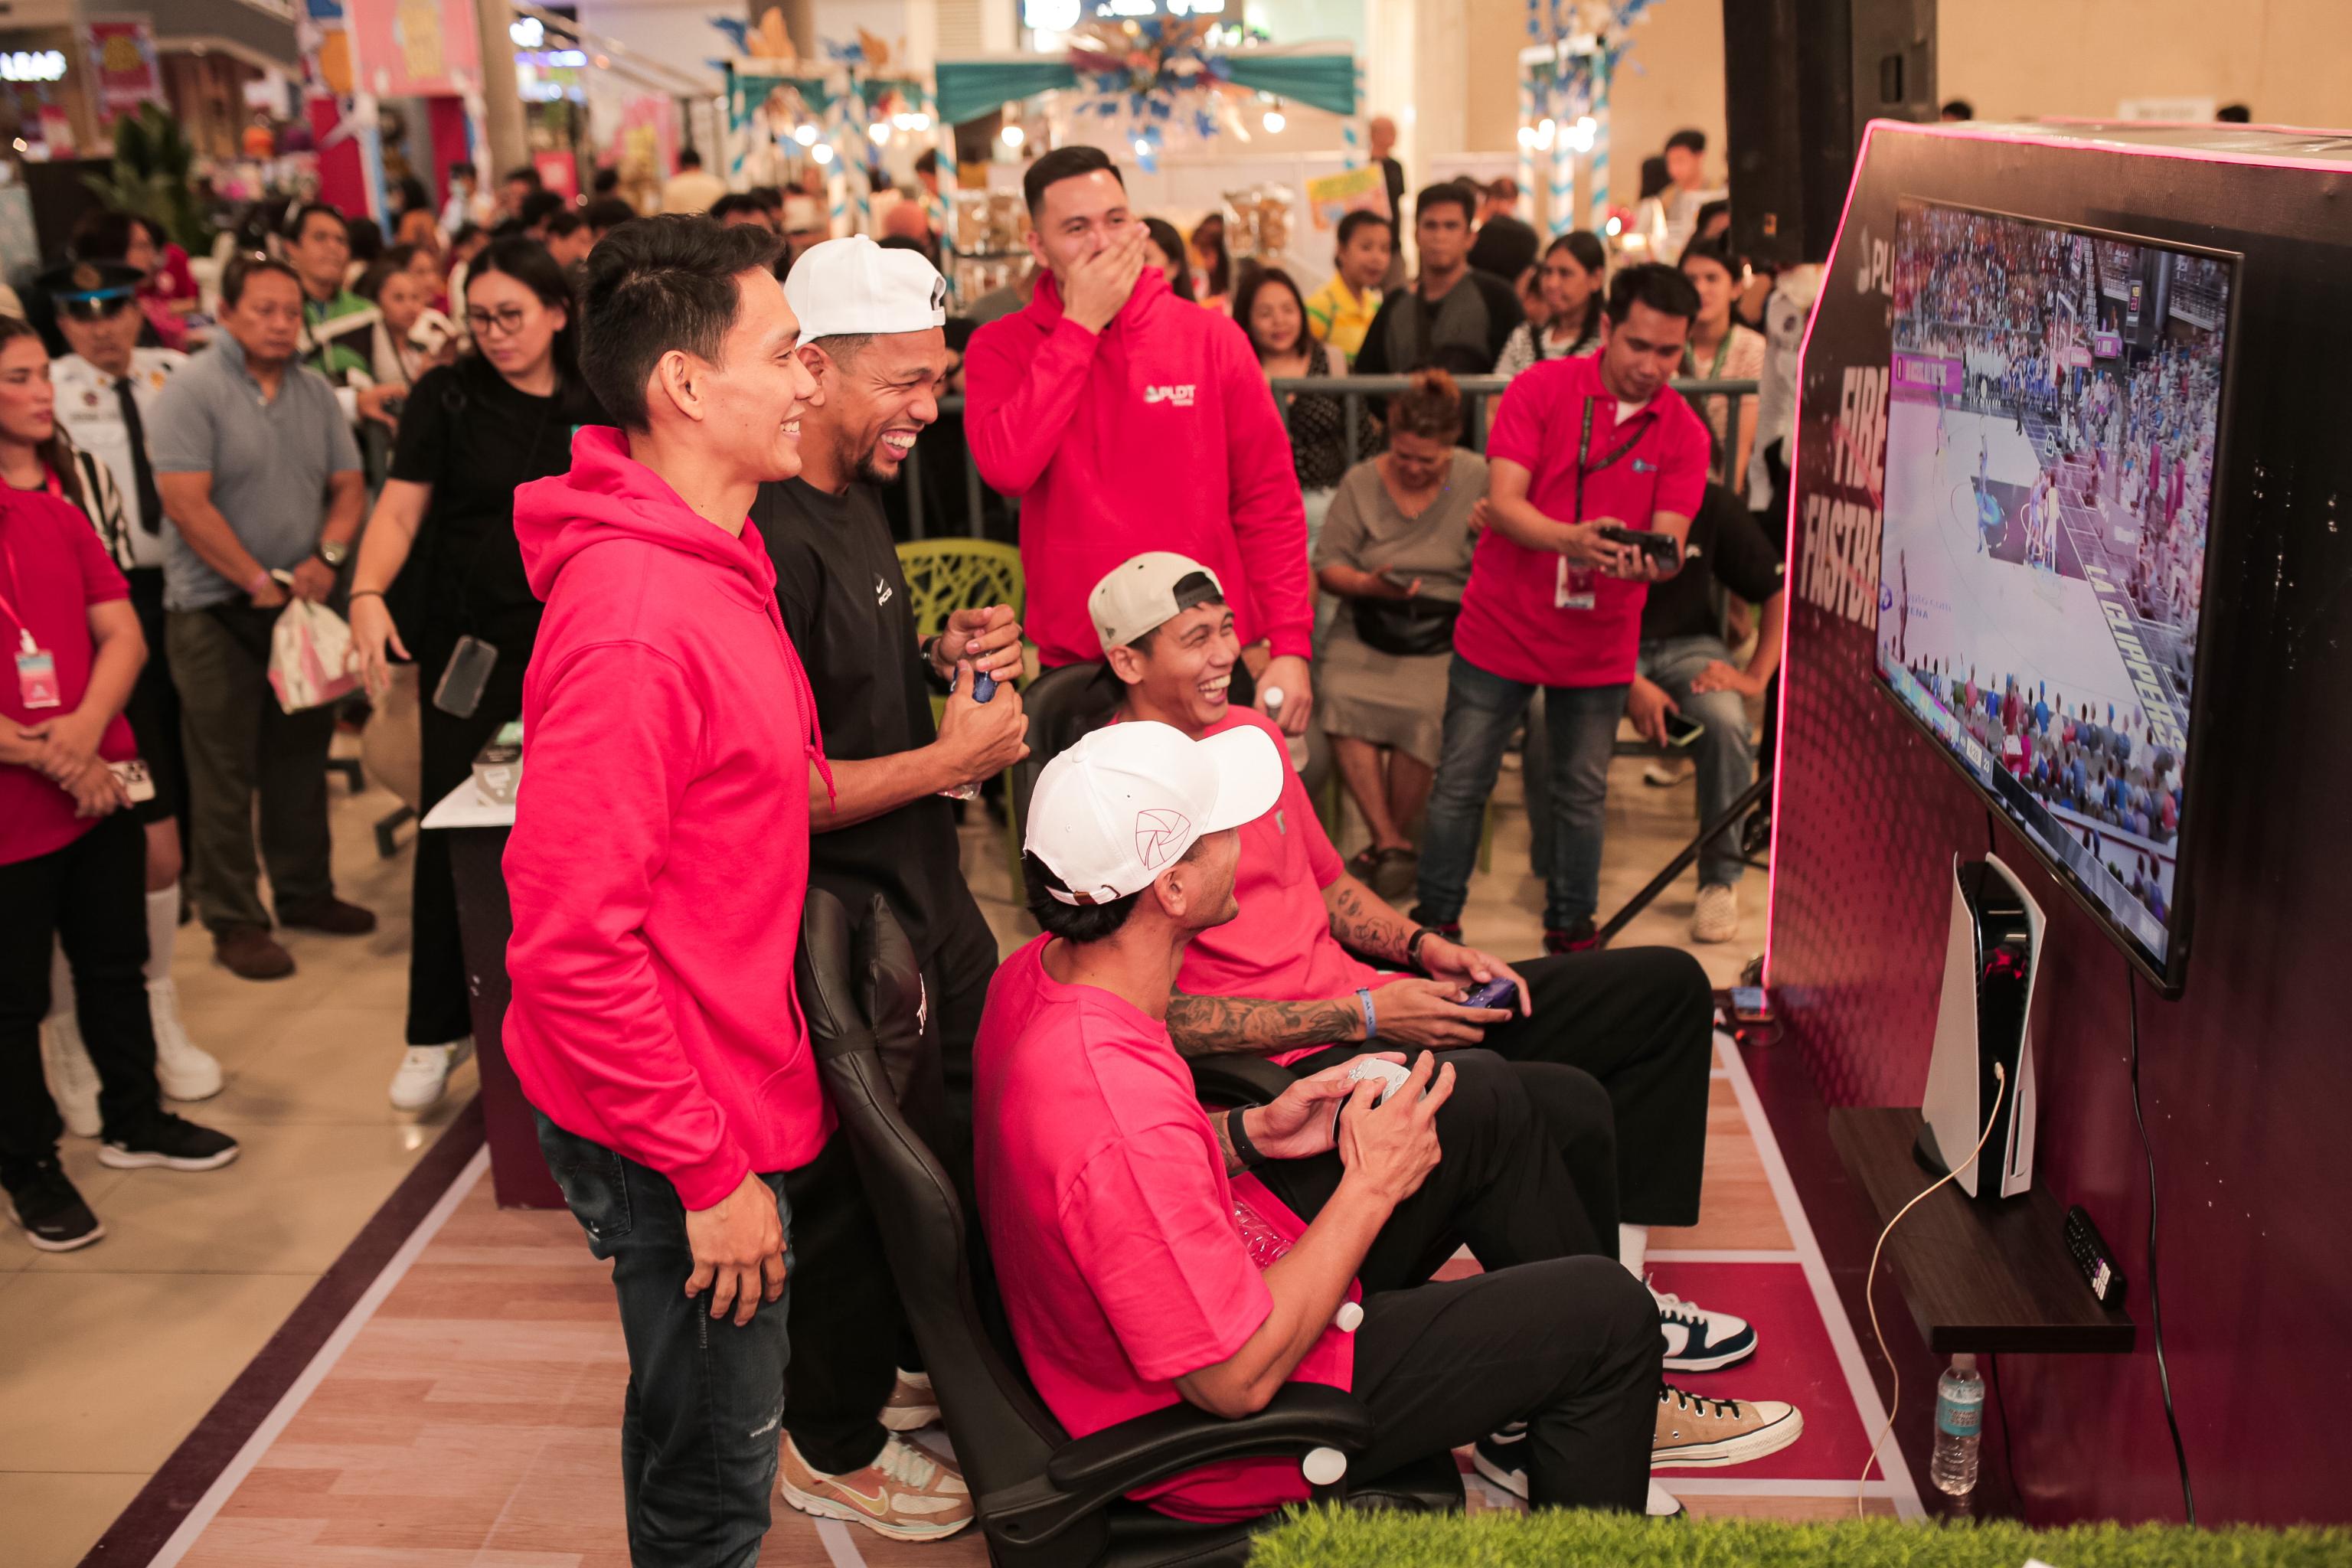 PBA stars show off their “off court” skills with a game of NBA 2K24 at the PLDT Home Fiber Fastbreak booth inside Gaisano Mall of Davao.